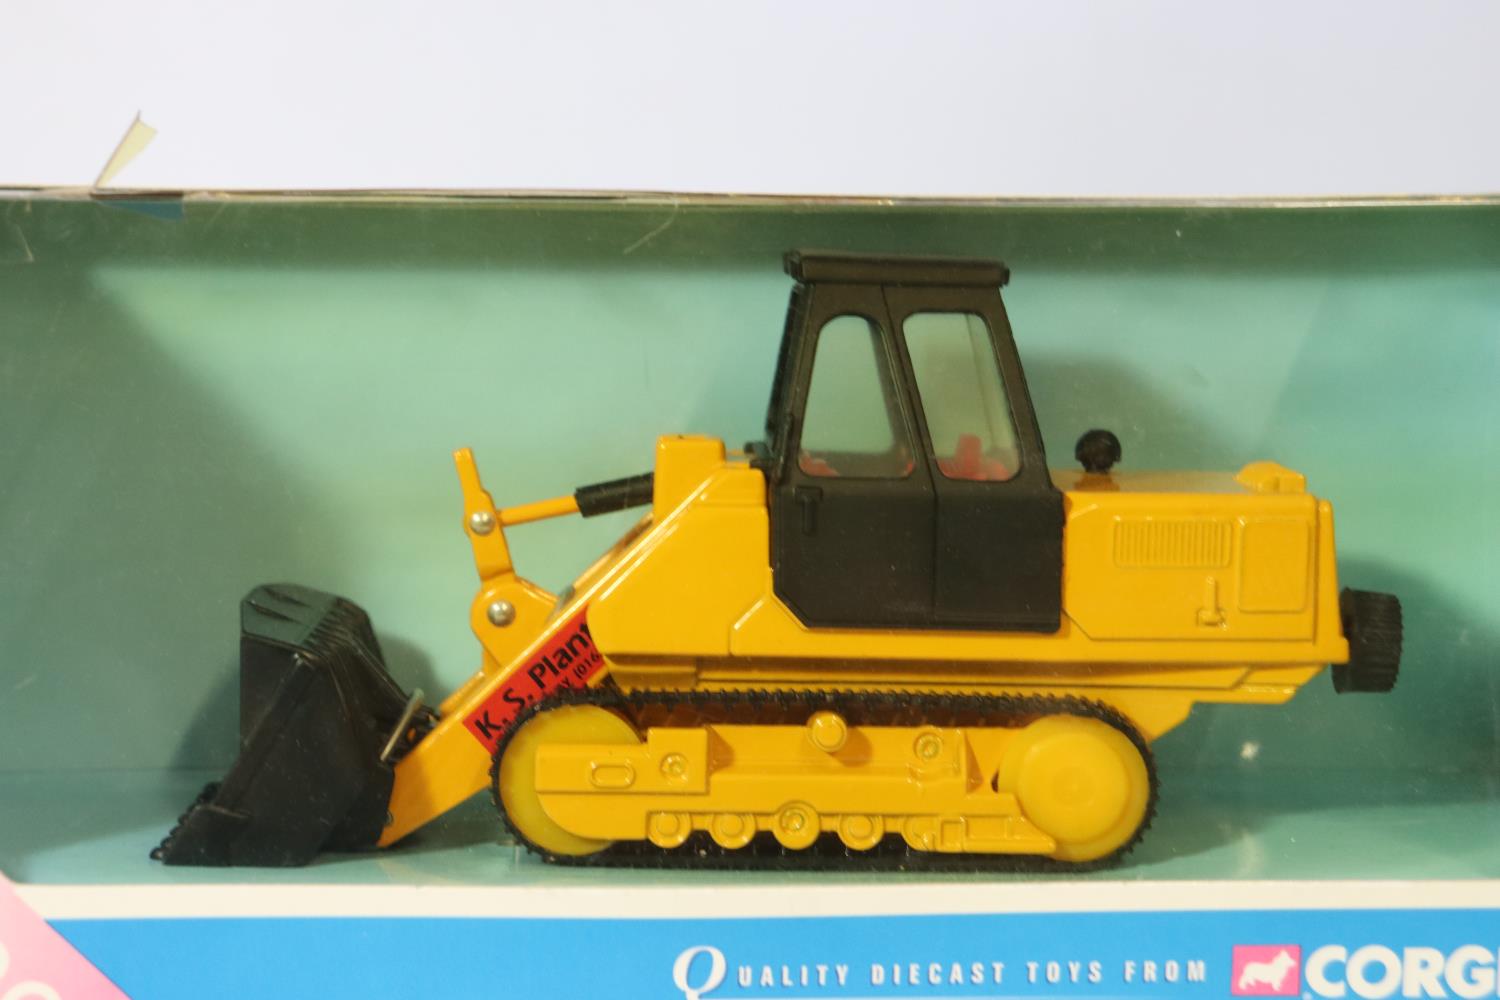 A DIECAST CORGI 66401 KS PLANT HIRE LOADER FULLY FUNCTIONING AND OPERATING BUCKET - Image 5 of 5